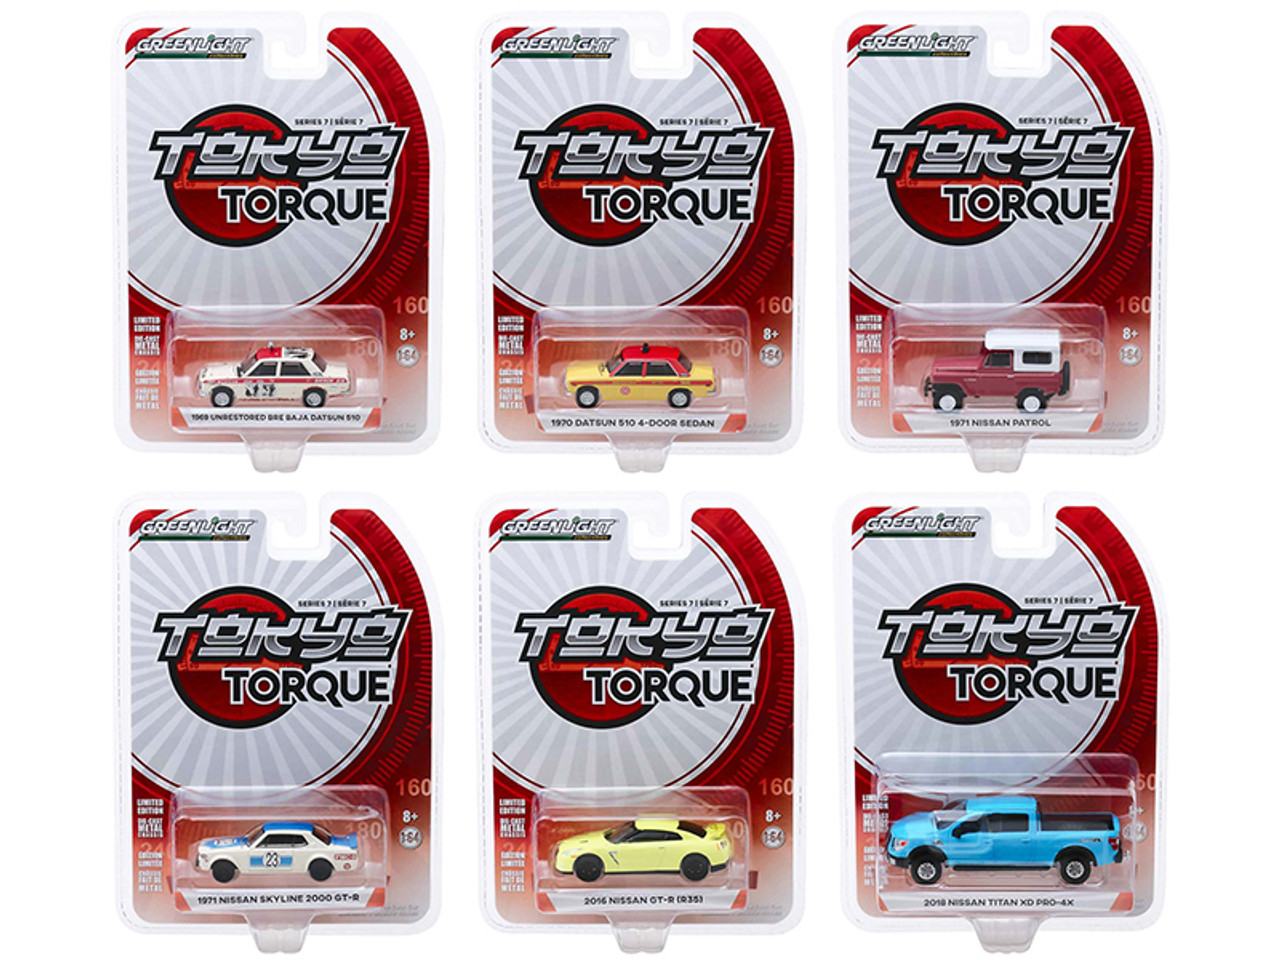 "Tokyo Torque" Set of 6 pieces Series 7 1/64 Diecast Model Cars by Greenlight